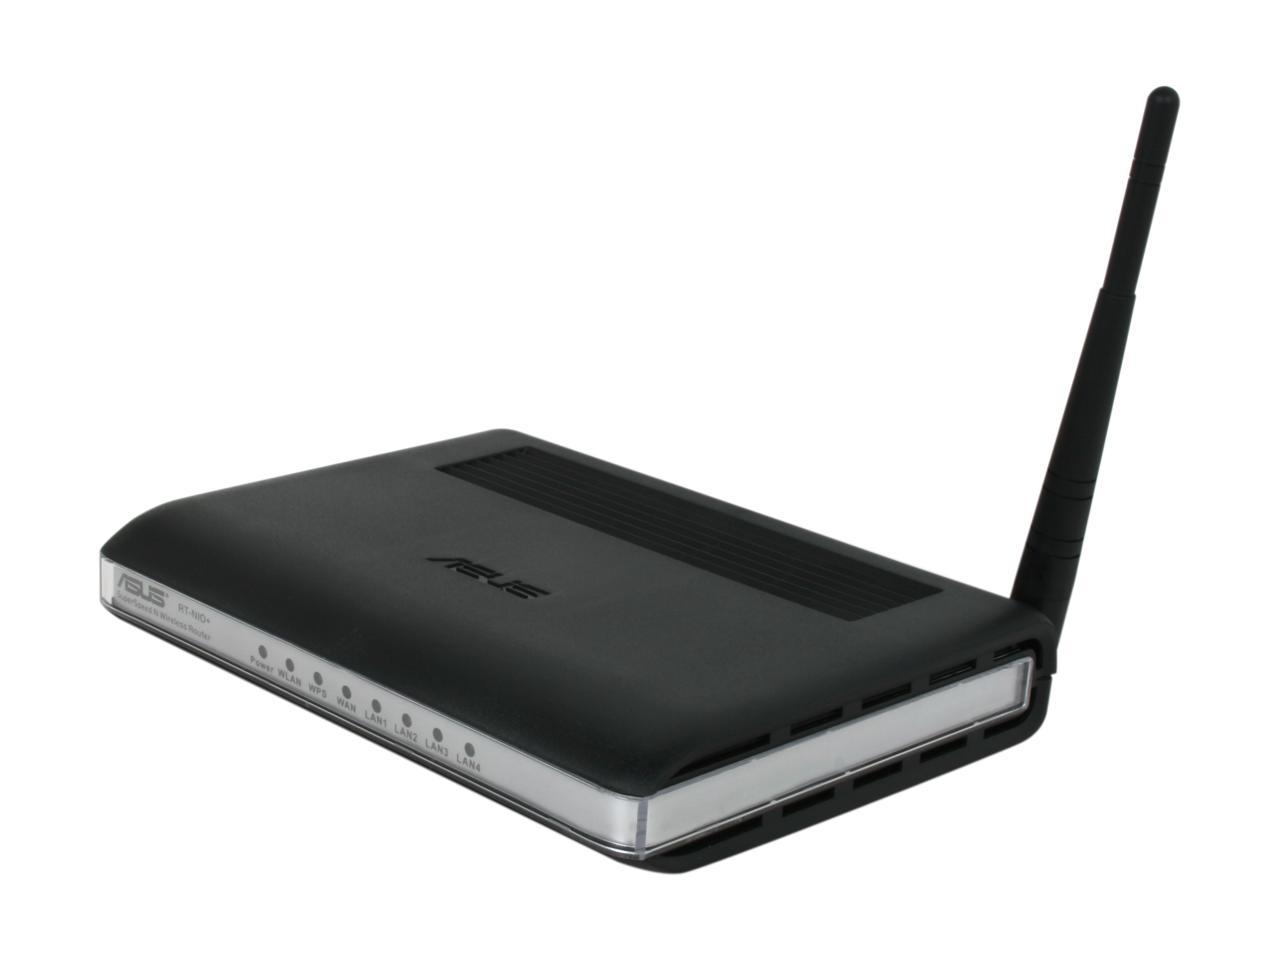 frokost server Anbefalede ASUS RT-N10+ IEEE Wireless Router EZ N 802.11b/g/n Support up to 4 SSID in  Business (Open source DDWRT support) - Newegg.com